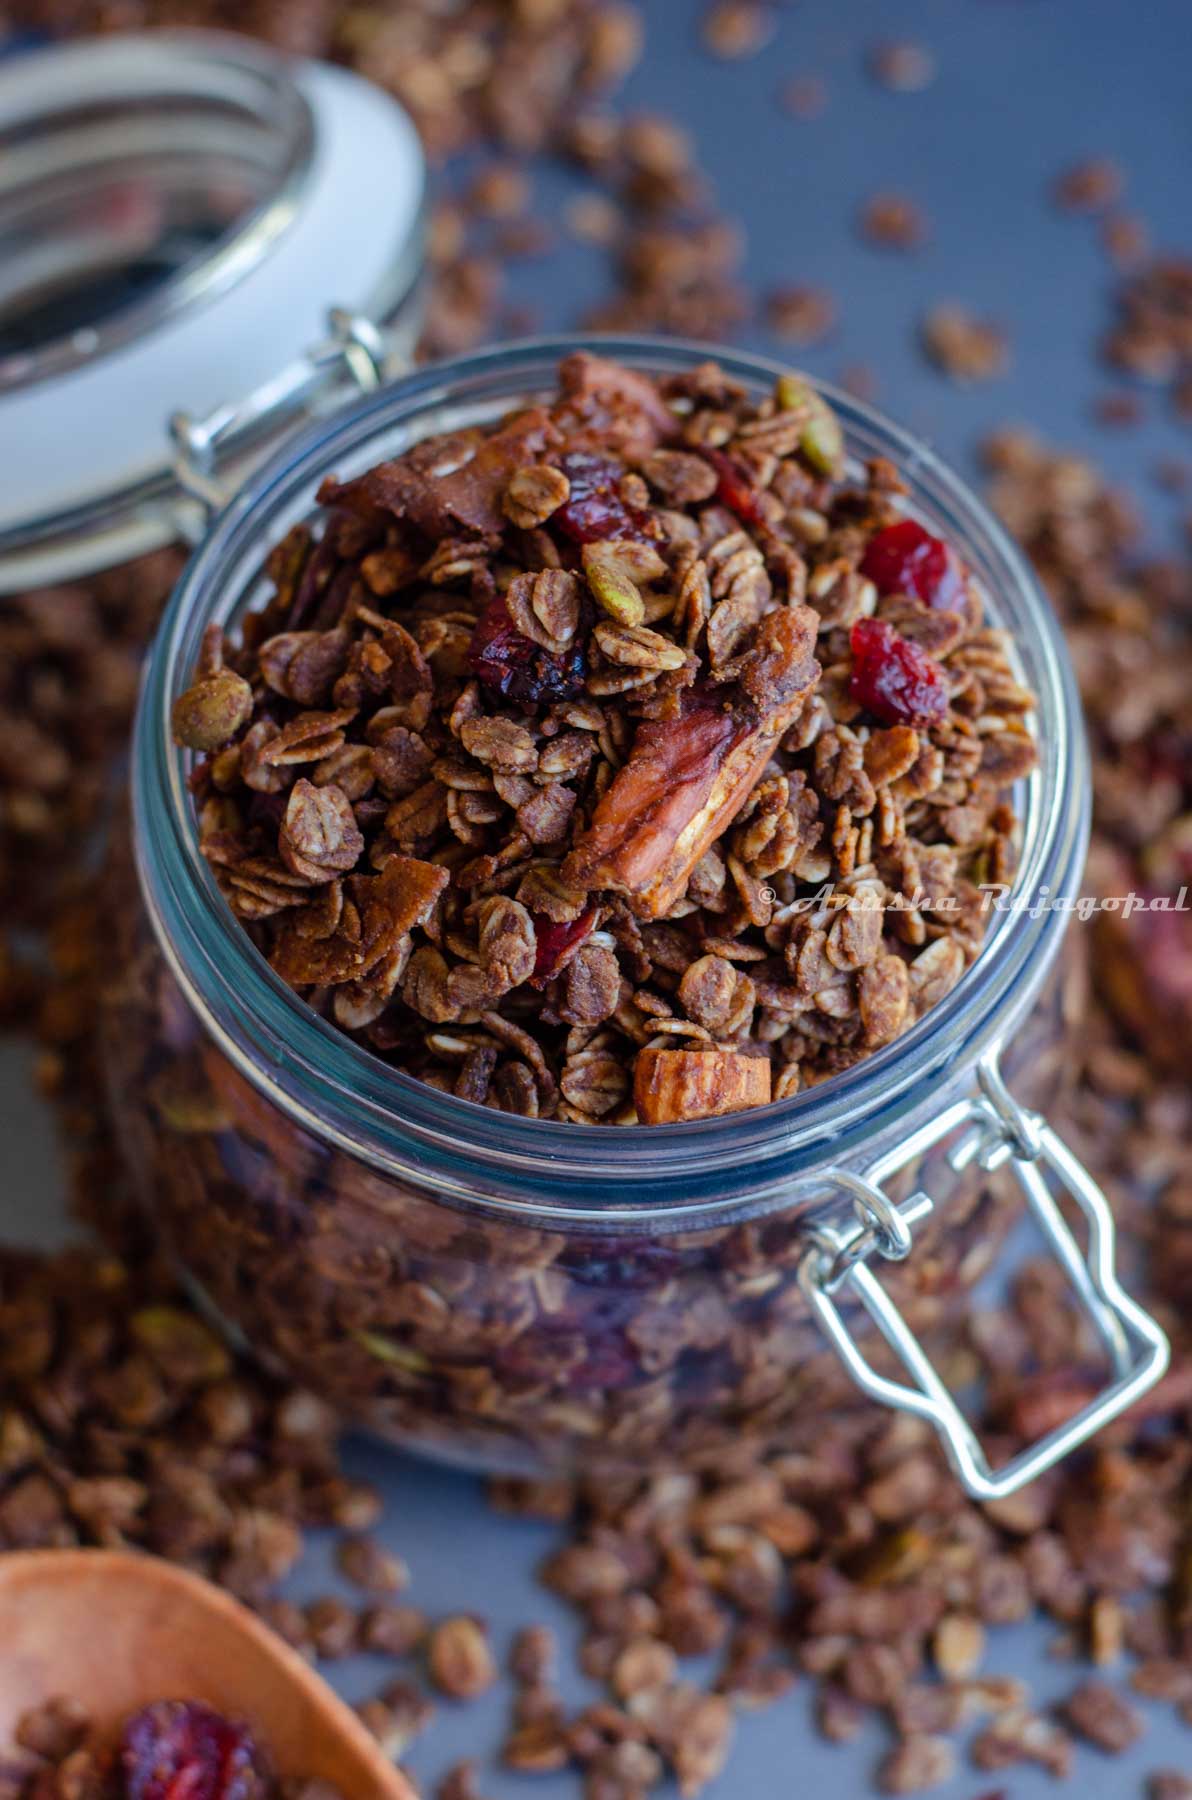 some homemade granola in a jar